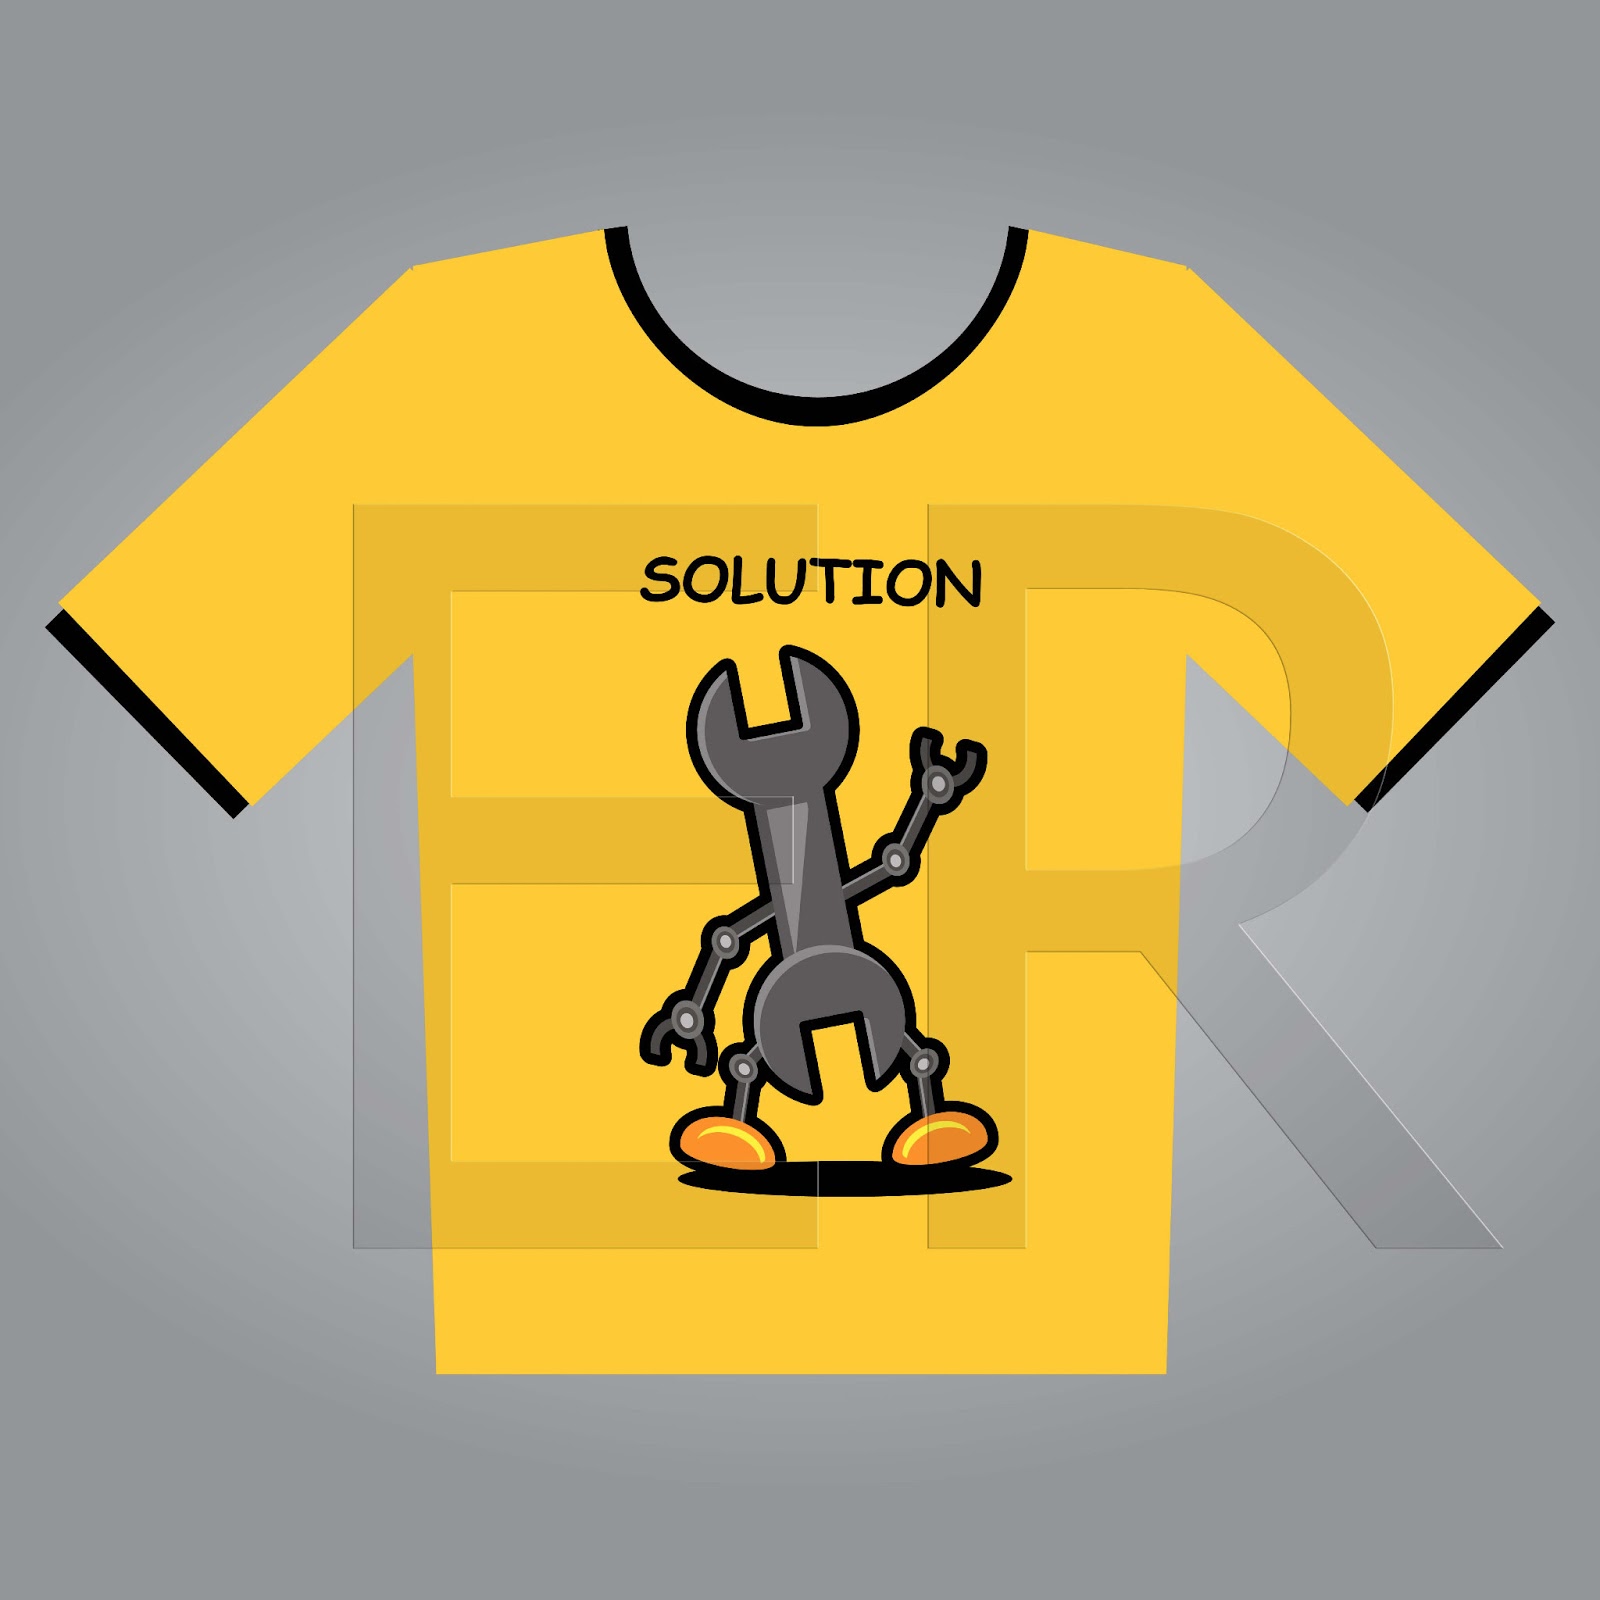 Download Vector In Graphic: Download My 10 Funny T-Shirt Design FREE!!!